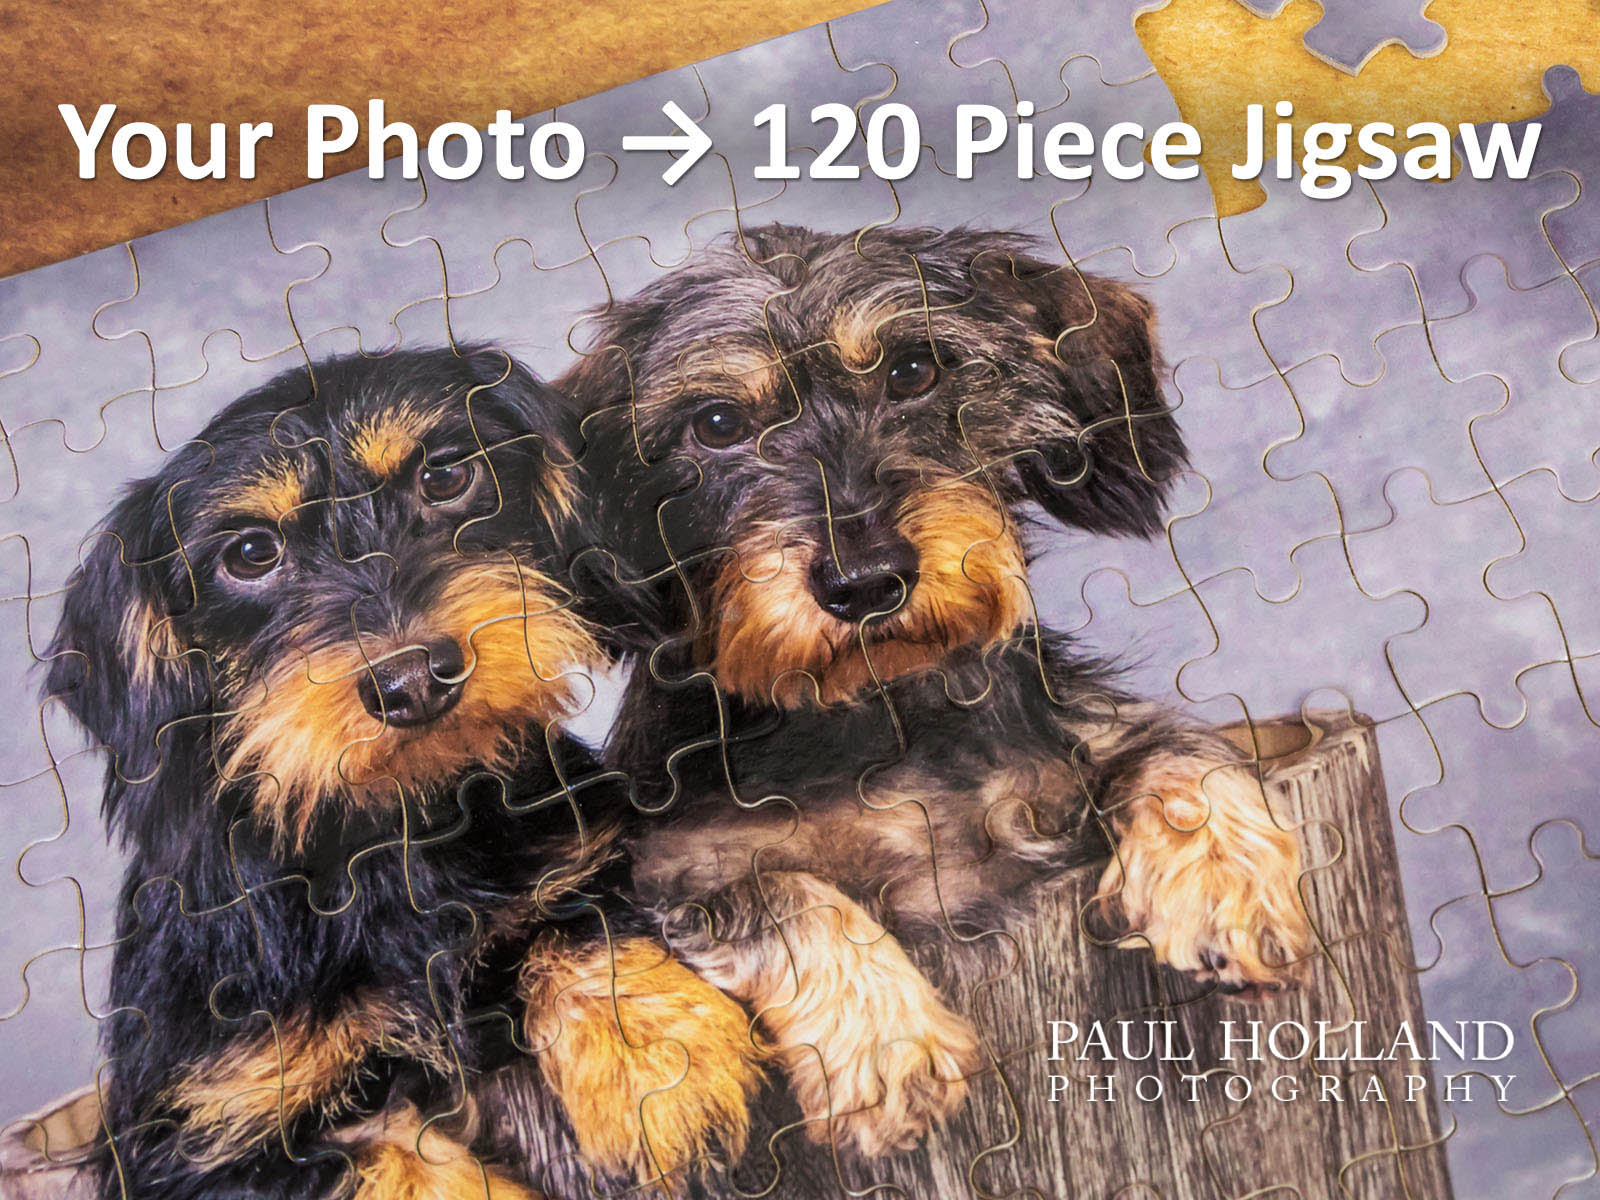 Your Photo as a Jigsaw Puzzle (120 piece)